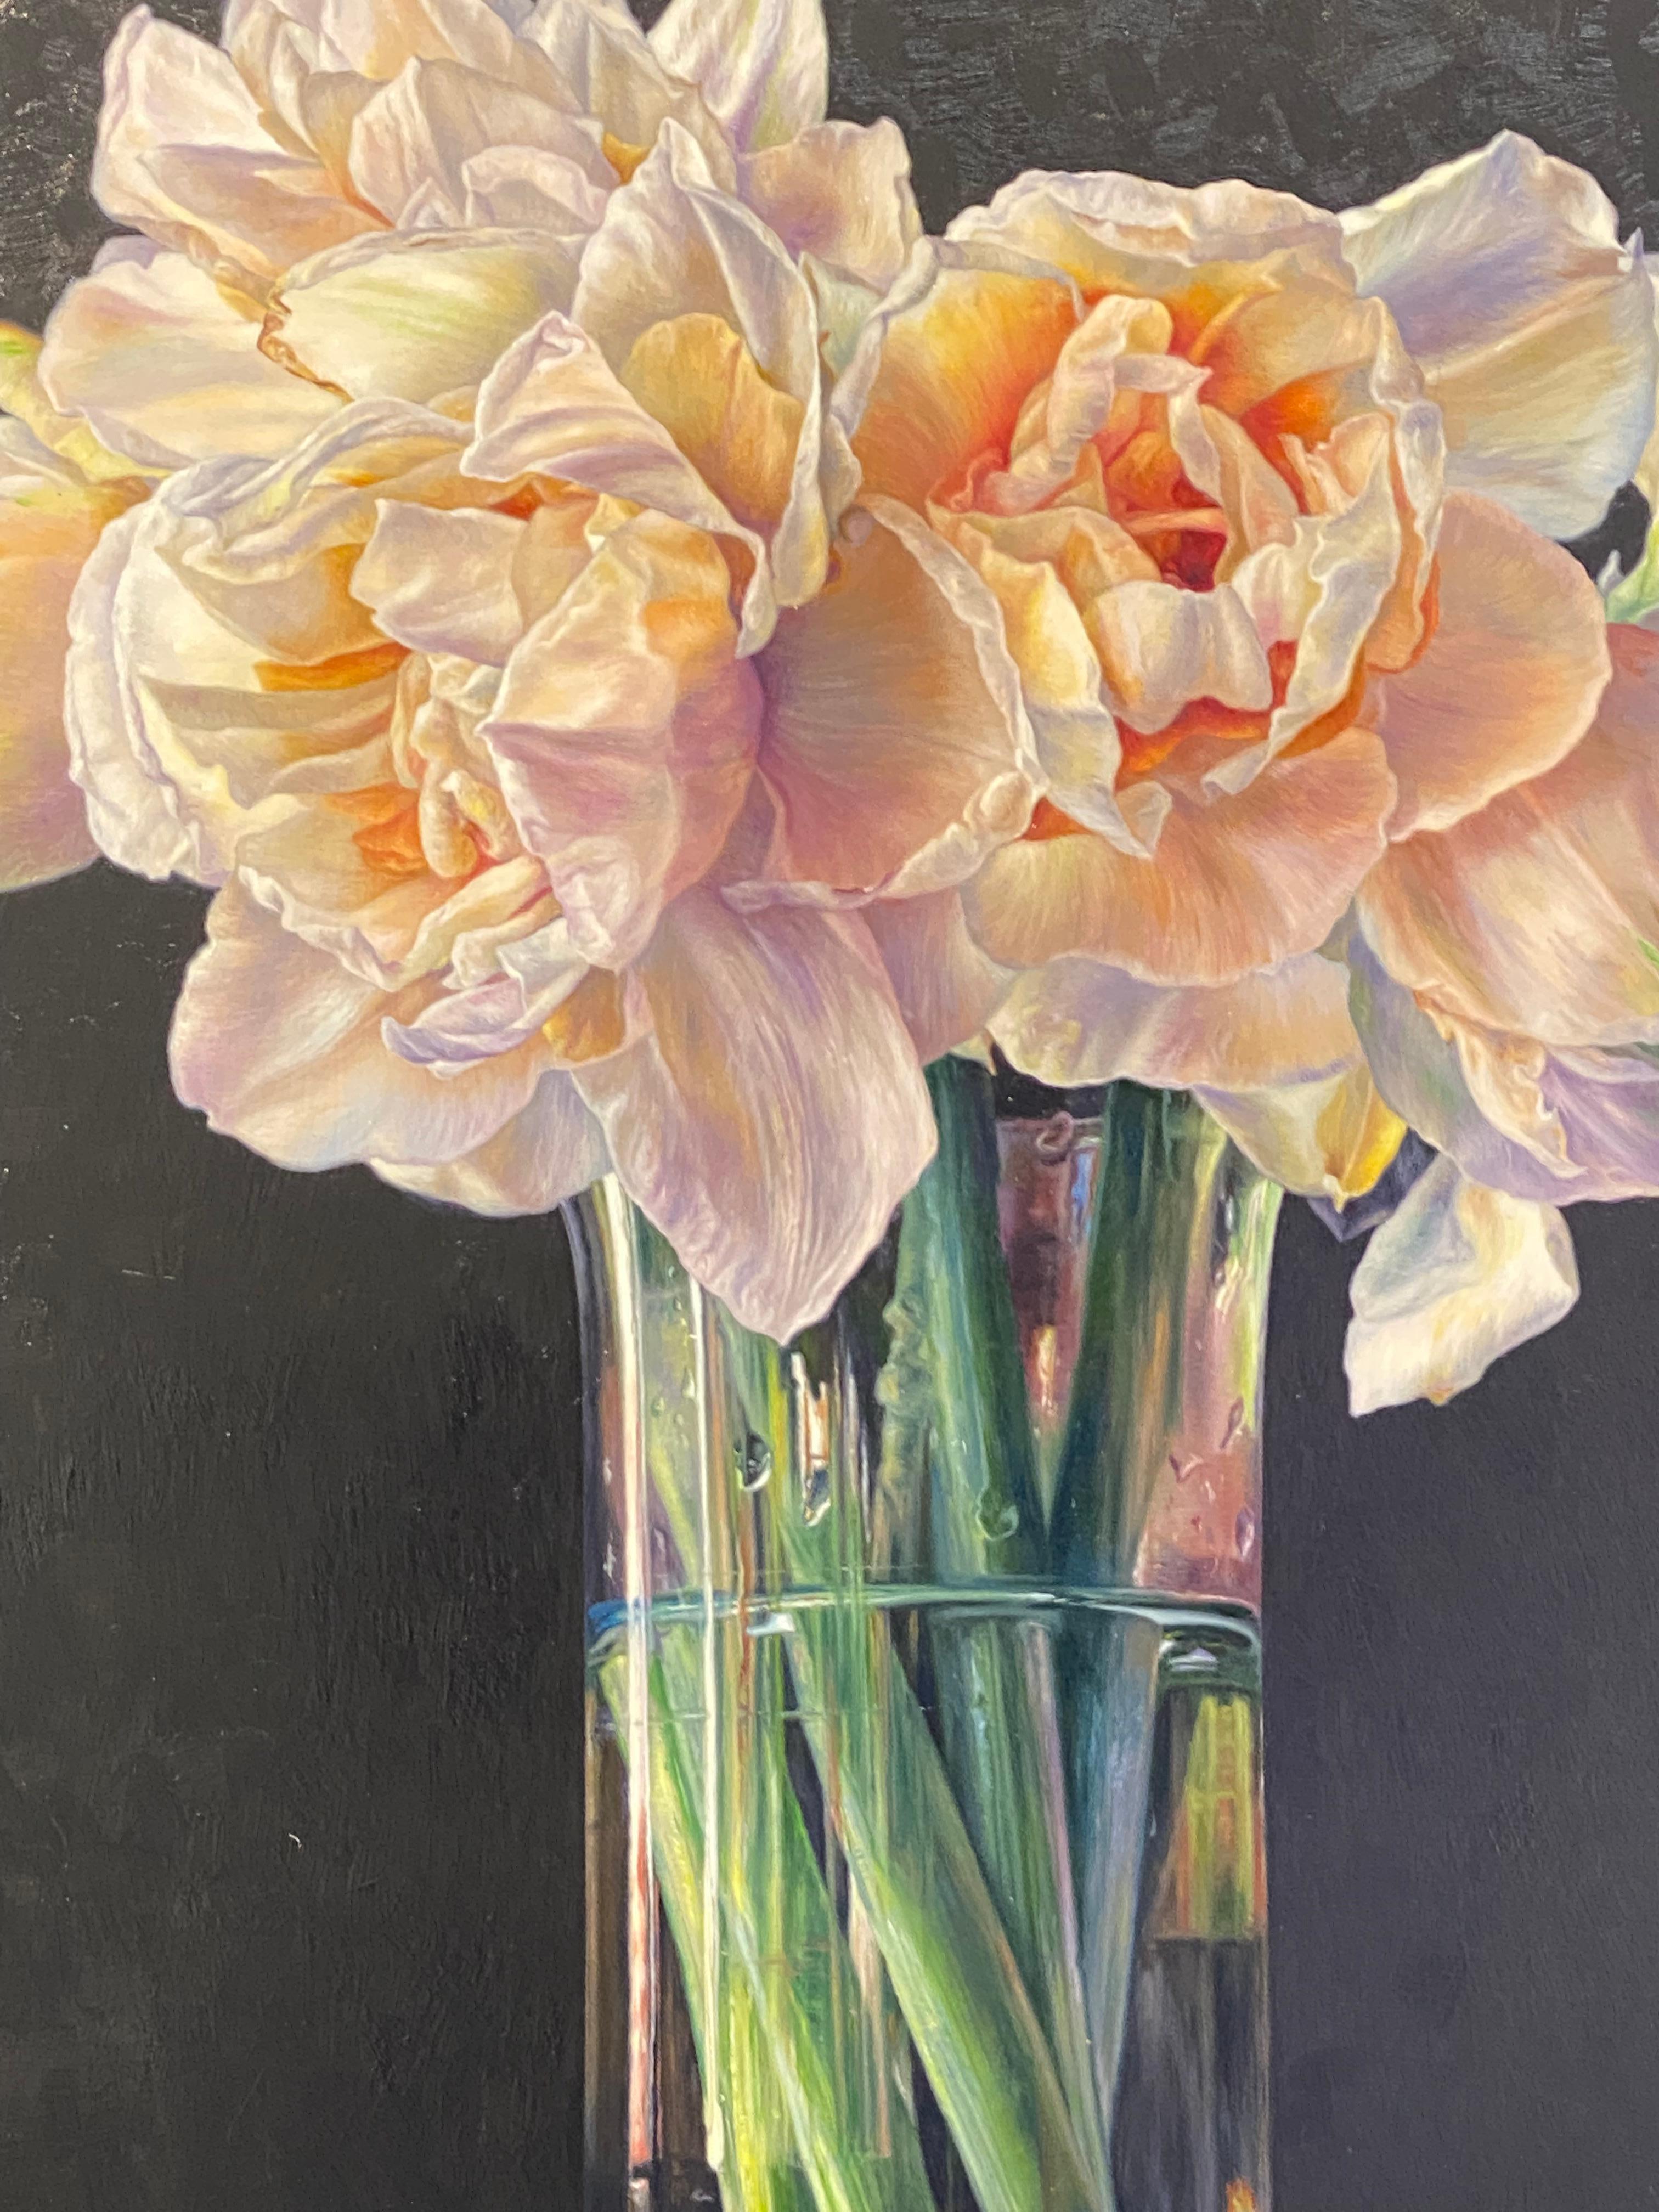 Primavera I
60 x 45 cm
Framed in a black wooden frame: 72 x 57 cm
Oil paint on wood panel

Dutch artist, painter, Adriana van Zoest, lives and works in Warmenhuizen, in the North of The Netherlands. We exclusively represent her paintings in our